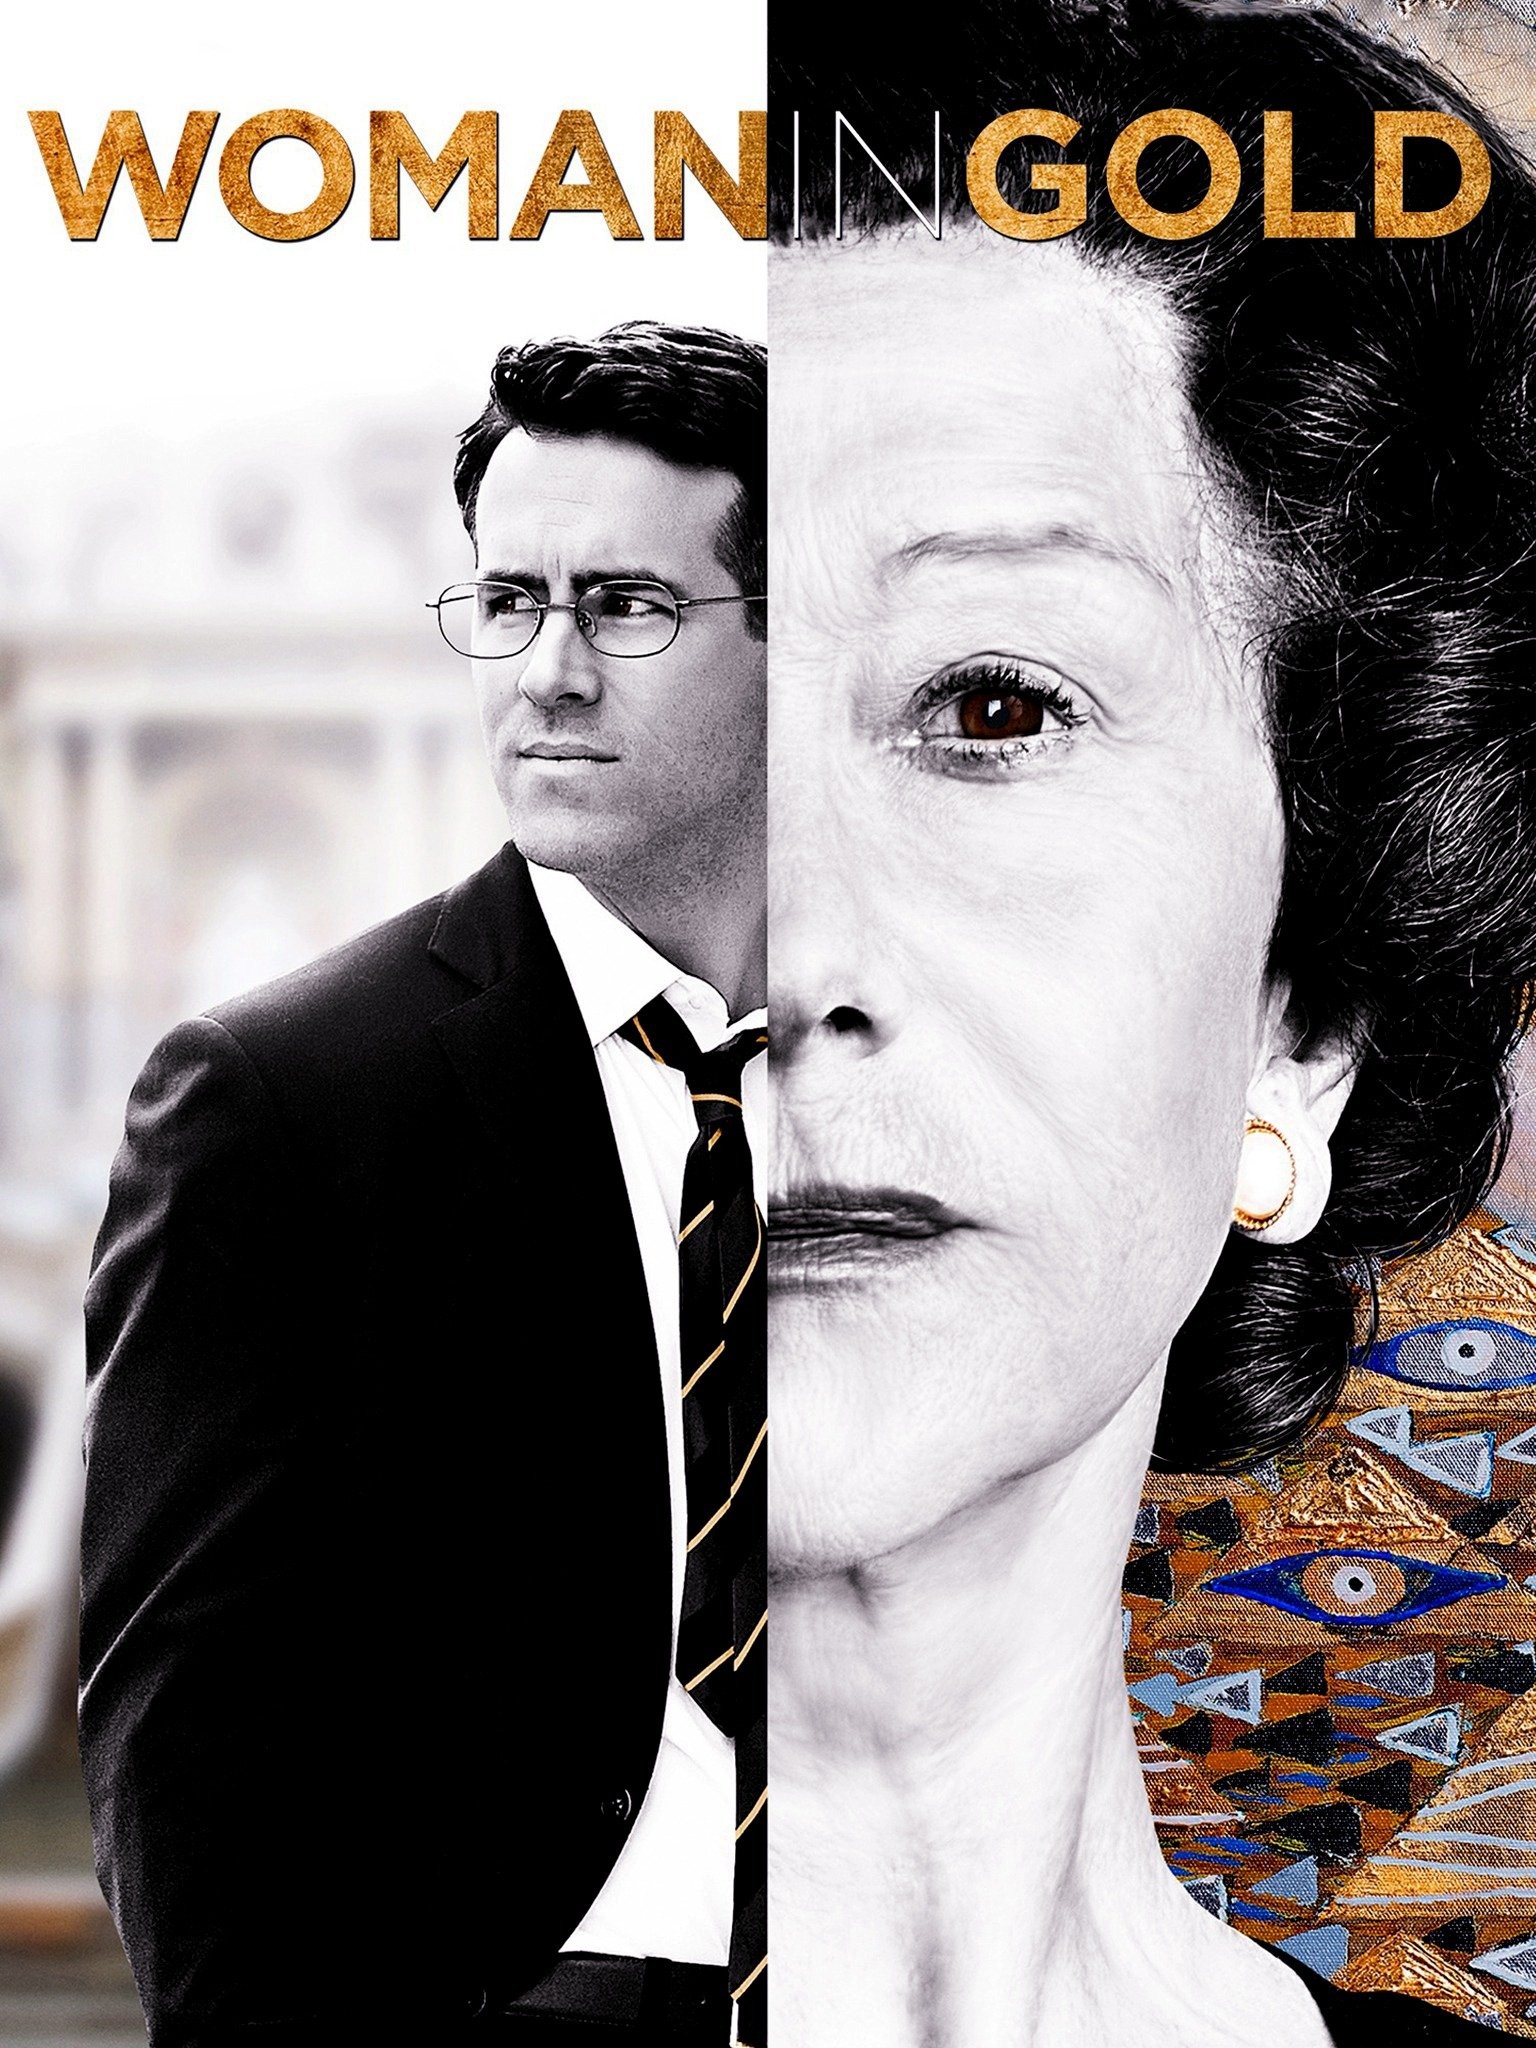 Friday Night at the Movies – Woman In Gold